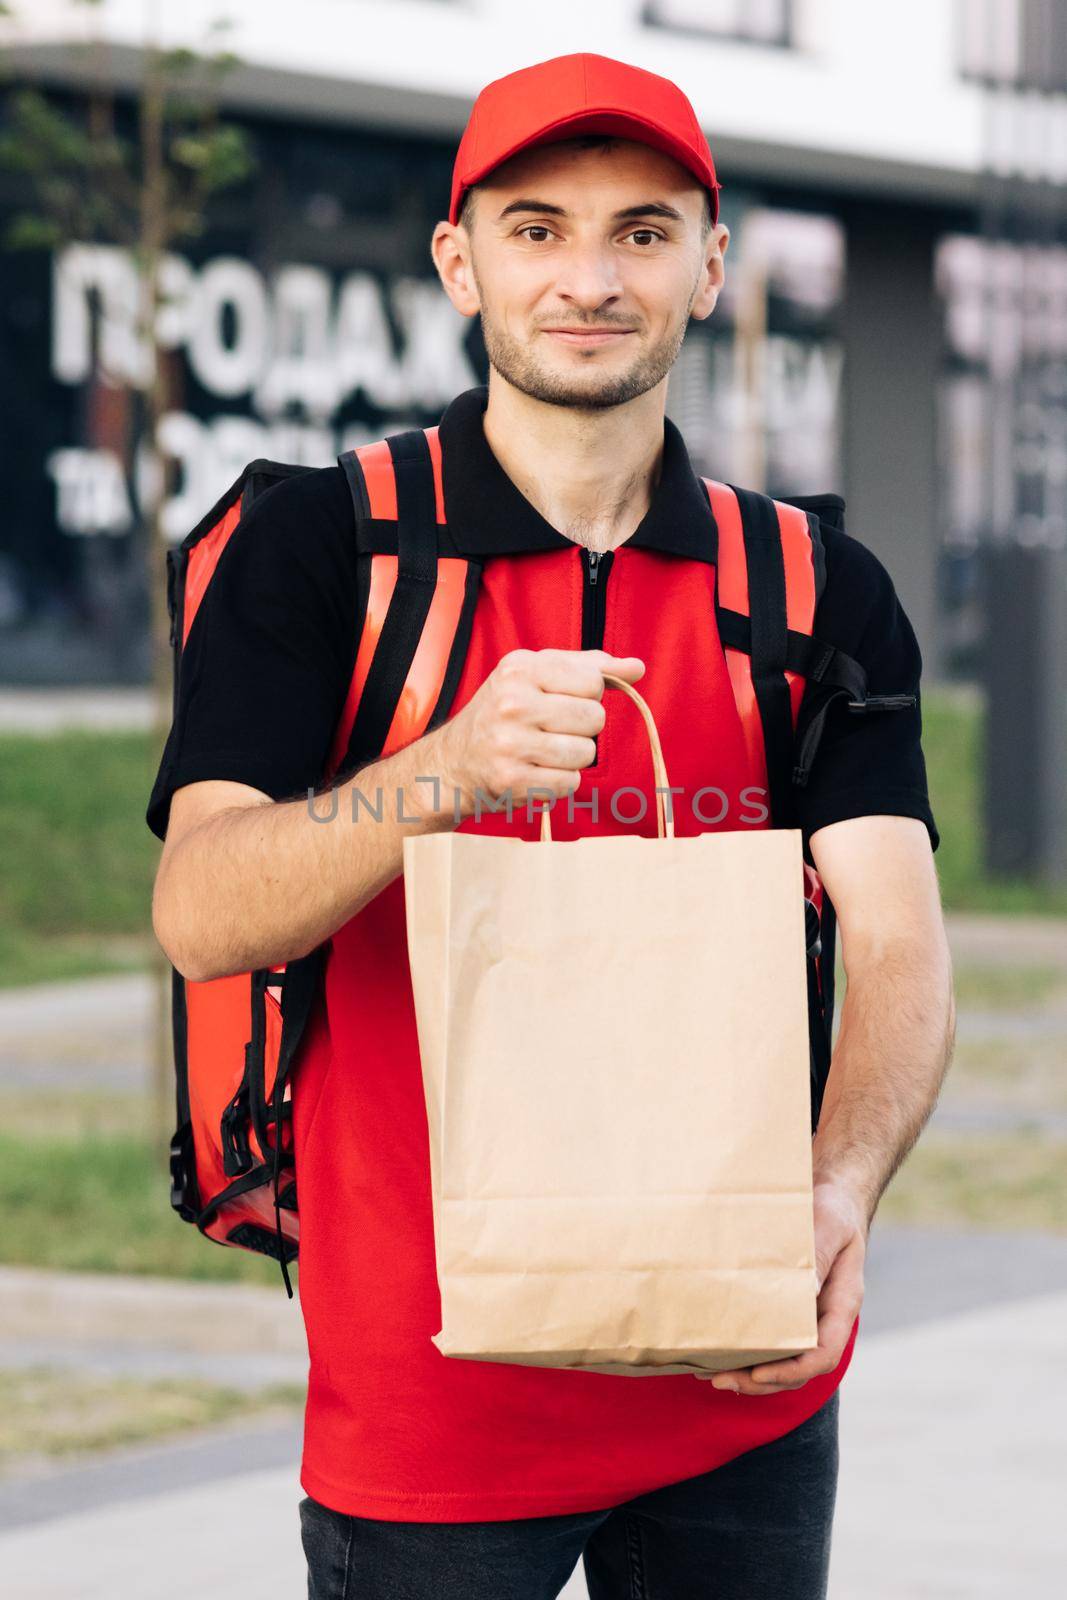 Outdoor portrait of delivery man with red uniform holding food bags waiting for customer. Happy young courier is proud of his job smiling standing in the street. Home delivery.